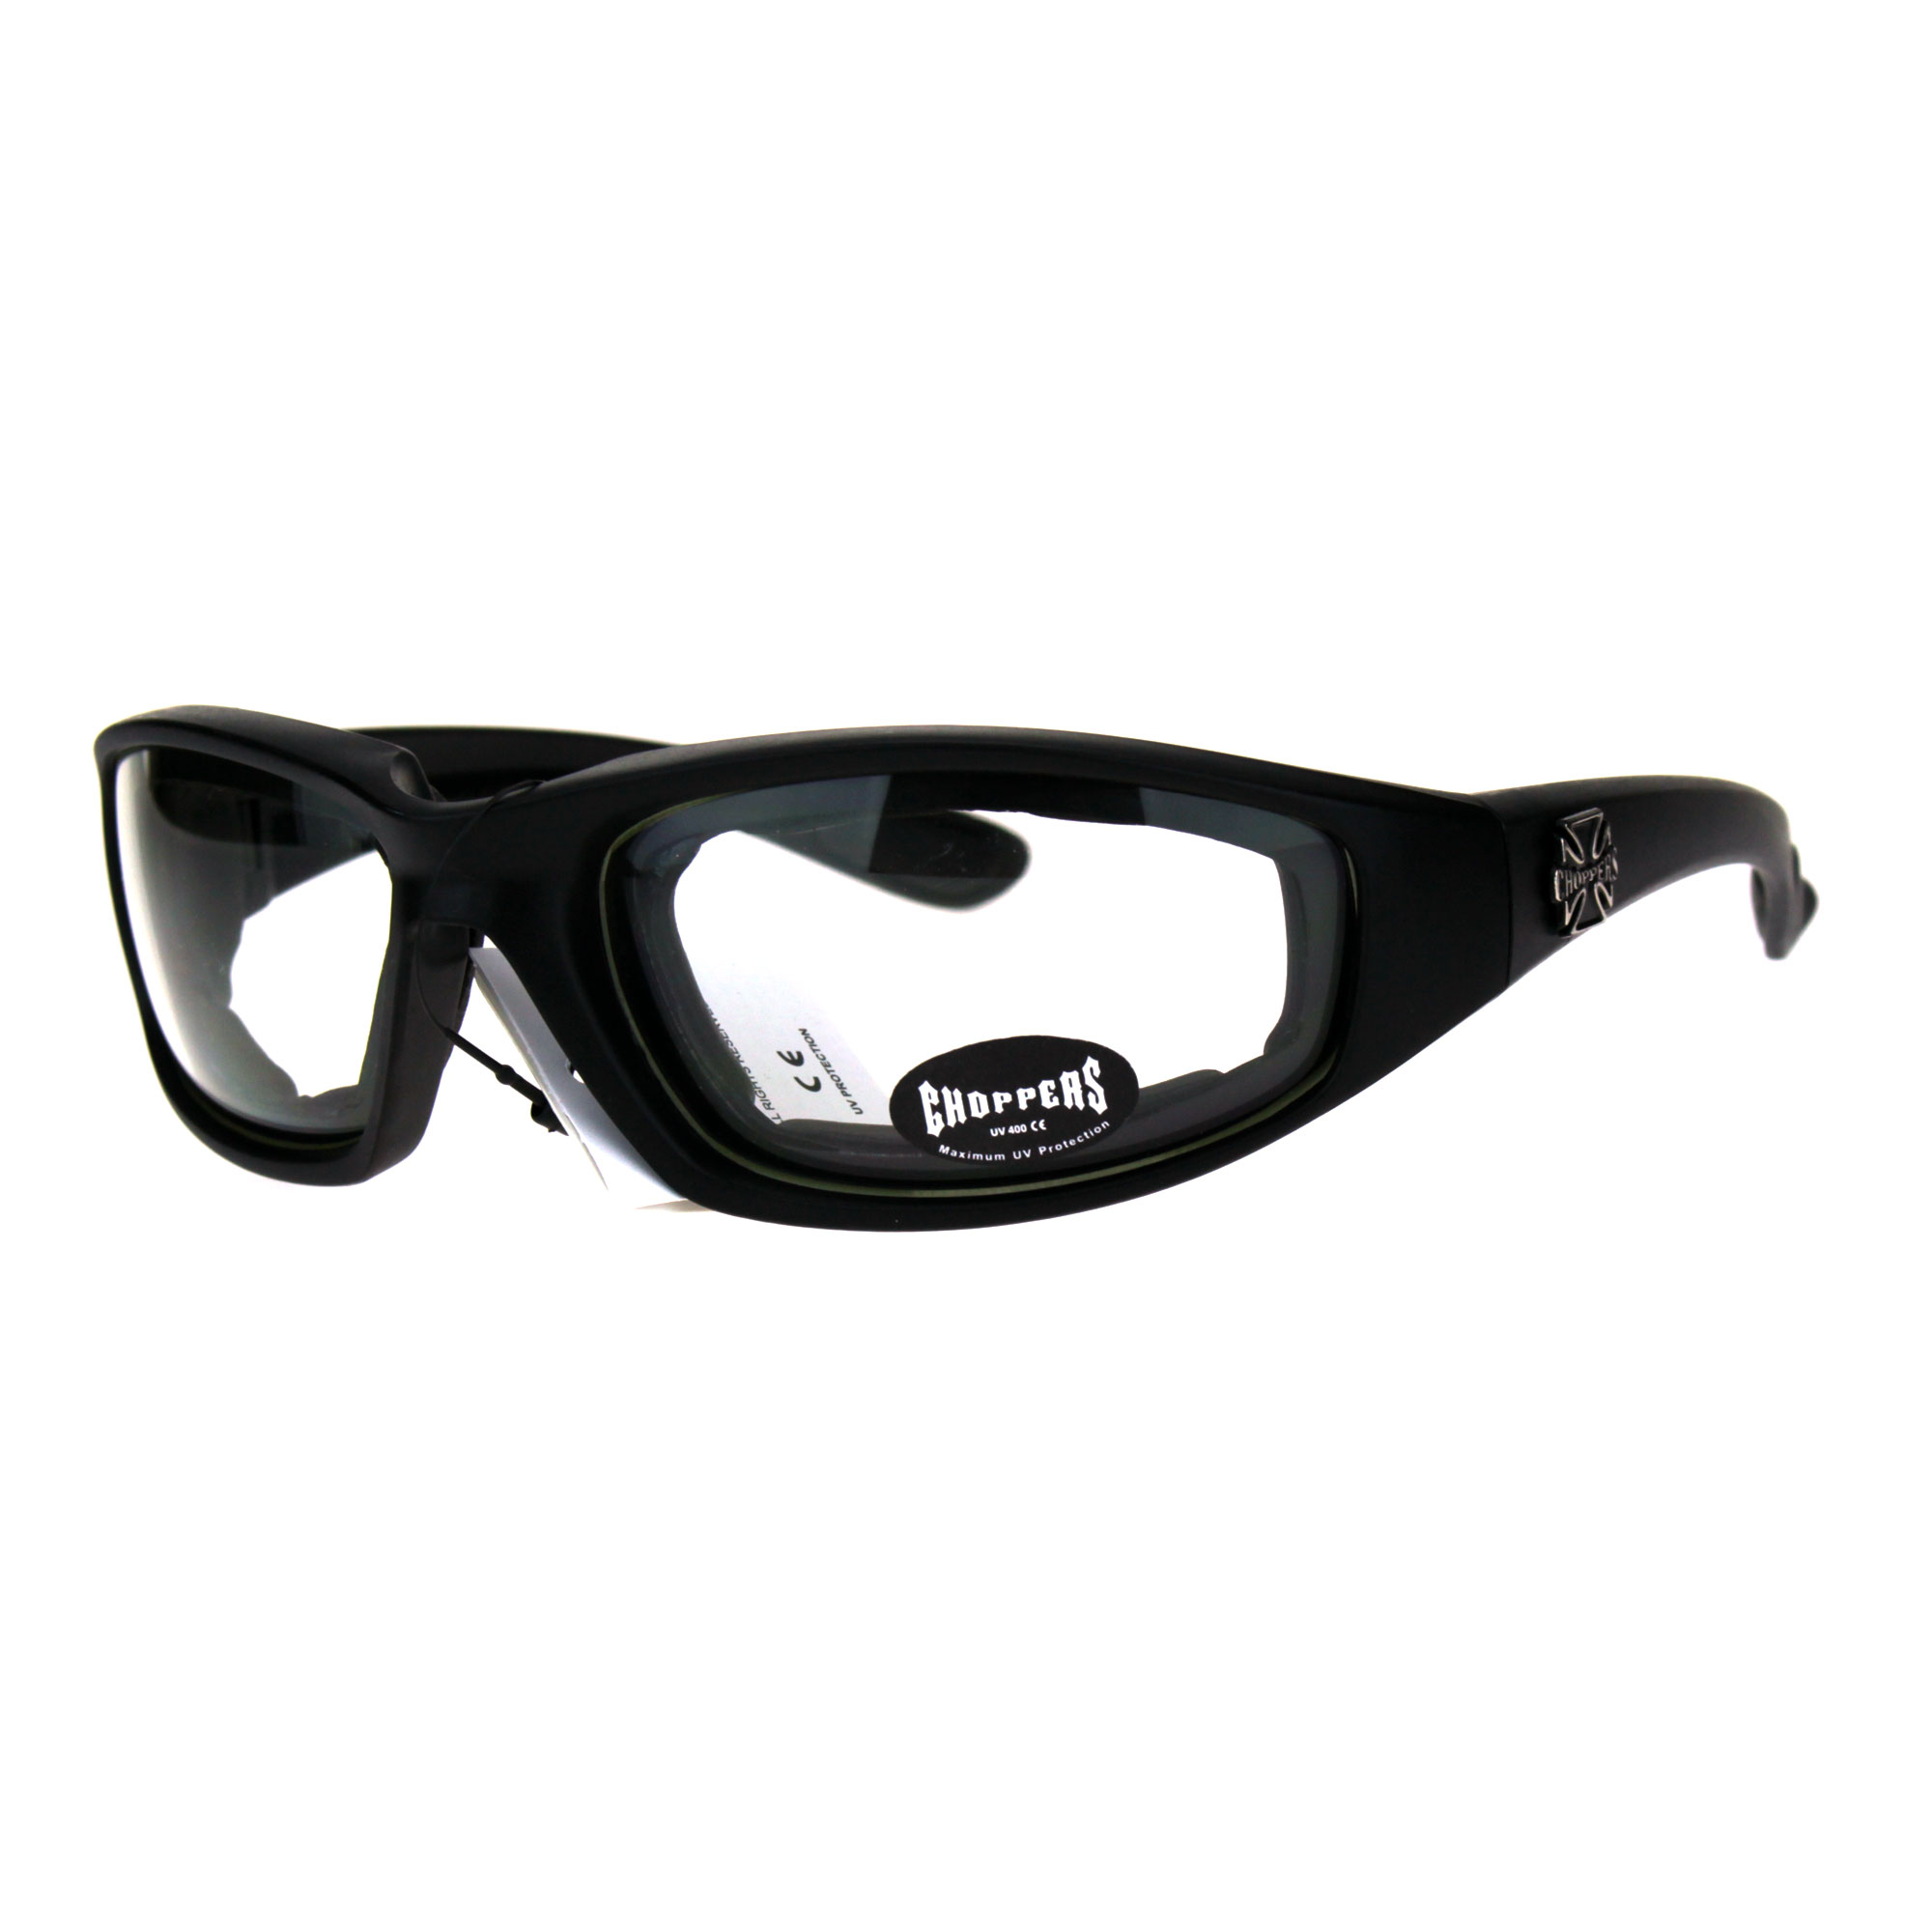 Choppers Motorcycle Sunglasses for Men